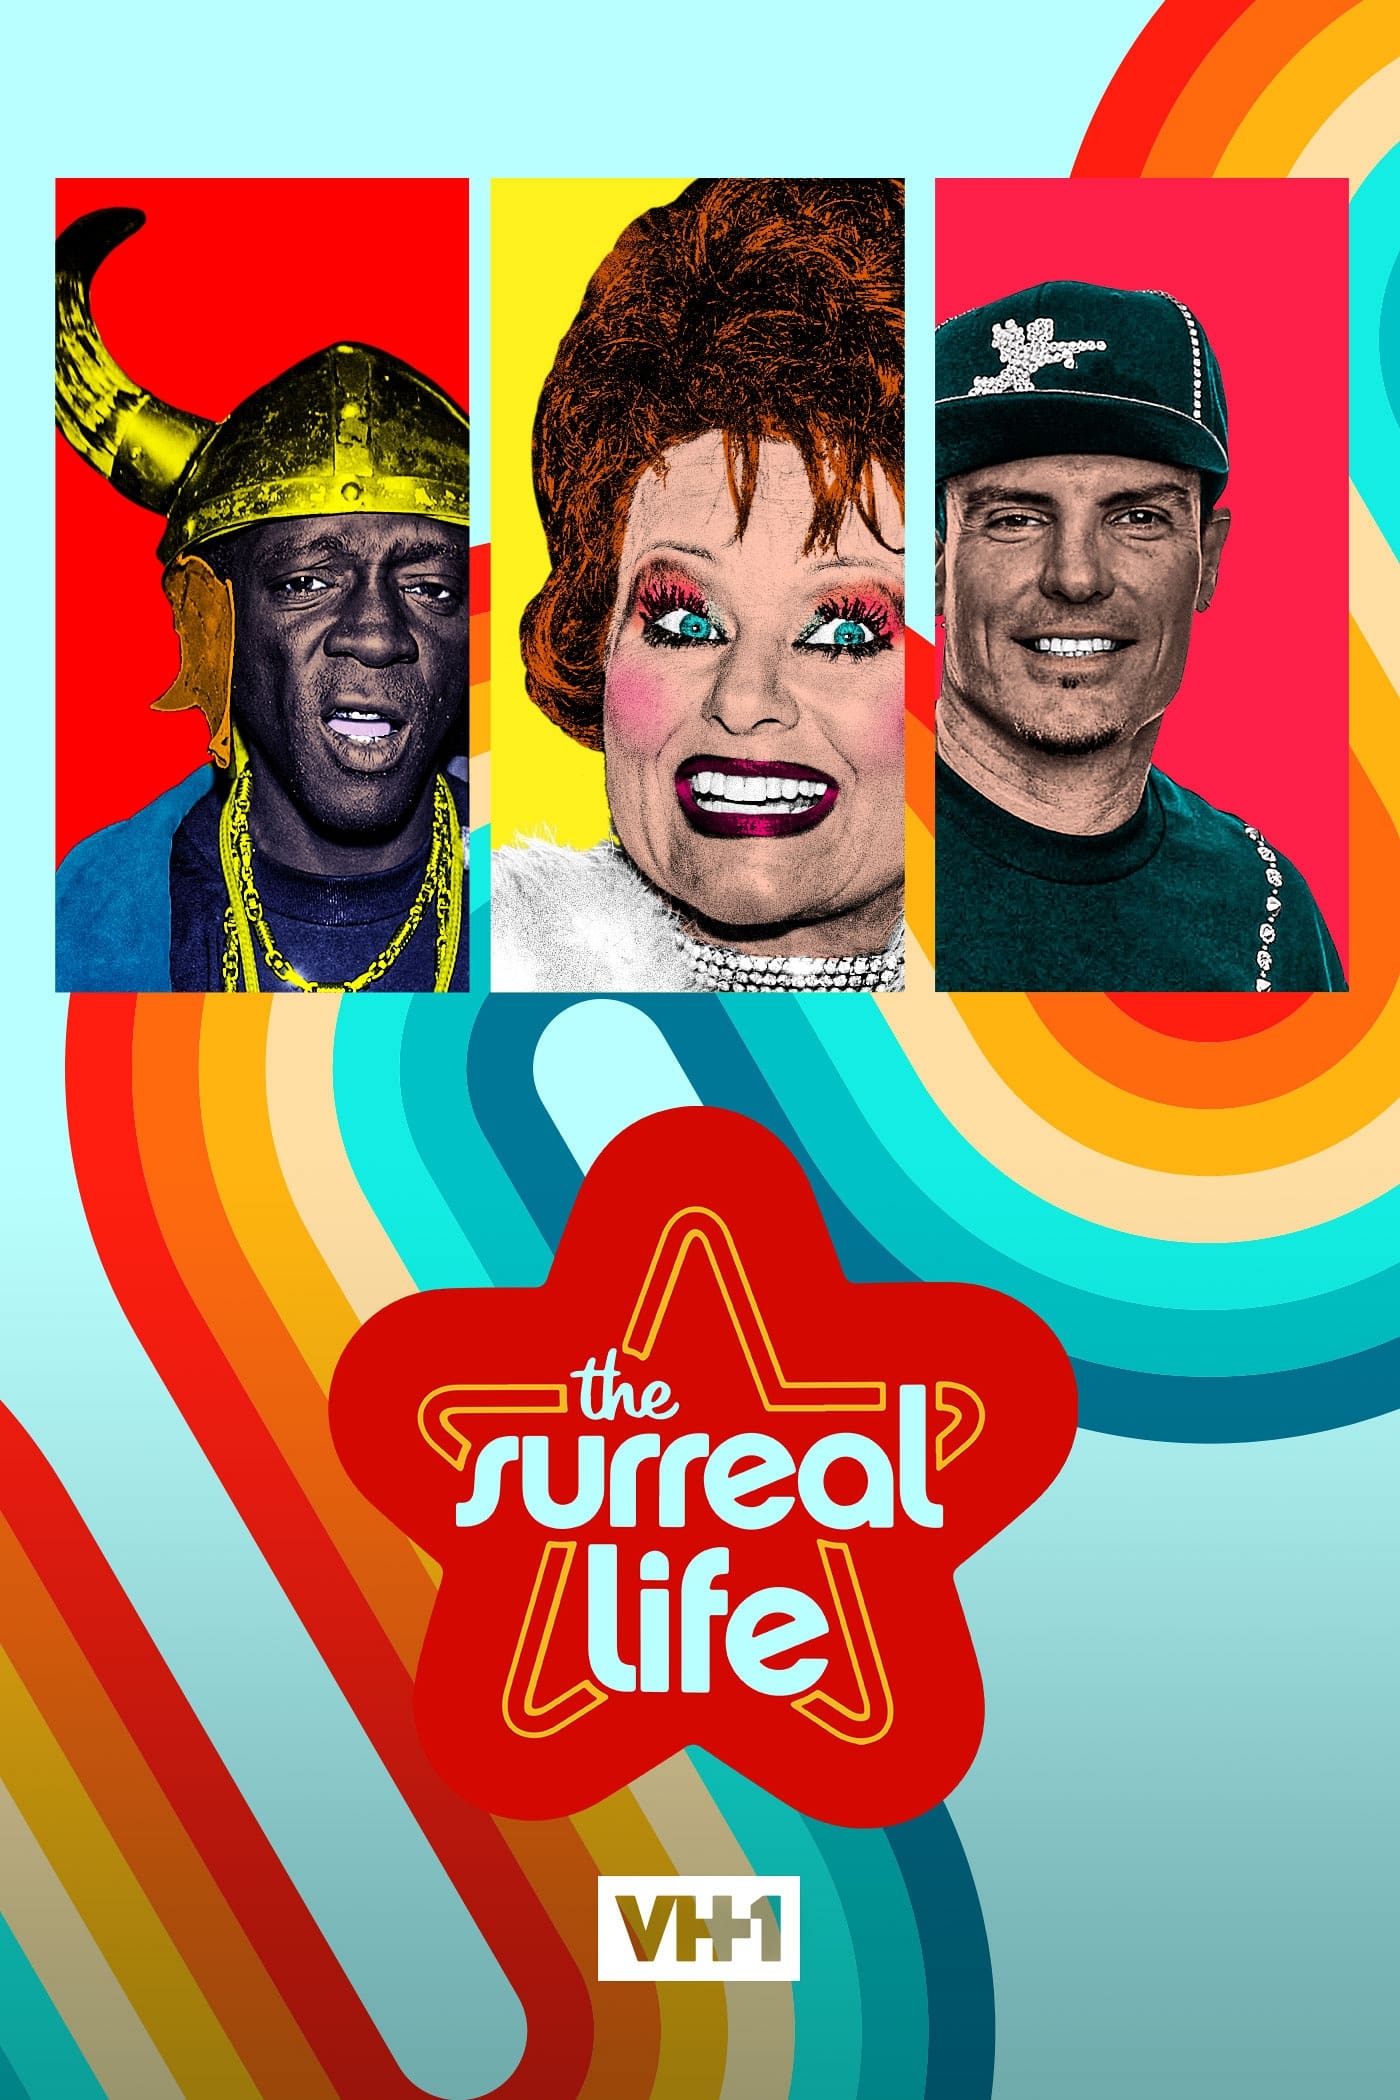 The Surreal Life TV Shows About Washed Up Star